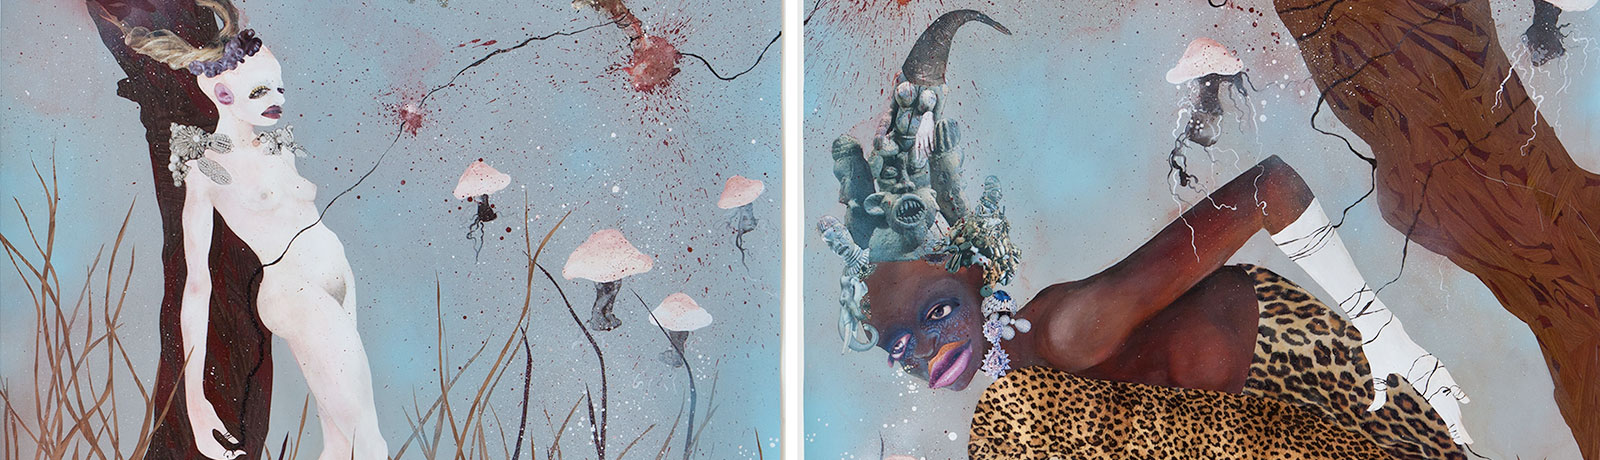 This major solo exhibition of work by Wangechi Mutu brings together nearly one hundred sculptures, paintings, collages, drawings, and films to present the breadth of the Kenyan–American artist’s multidisciplinary practice. 
